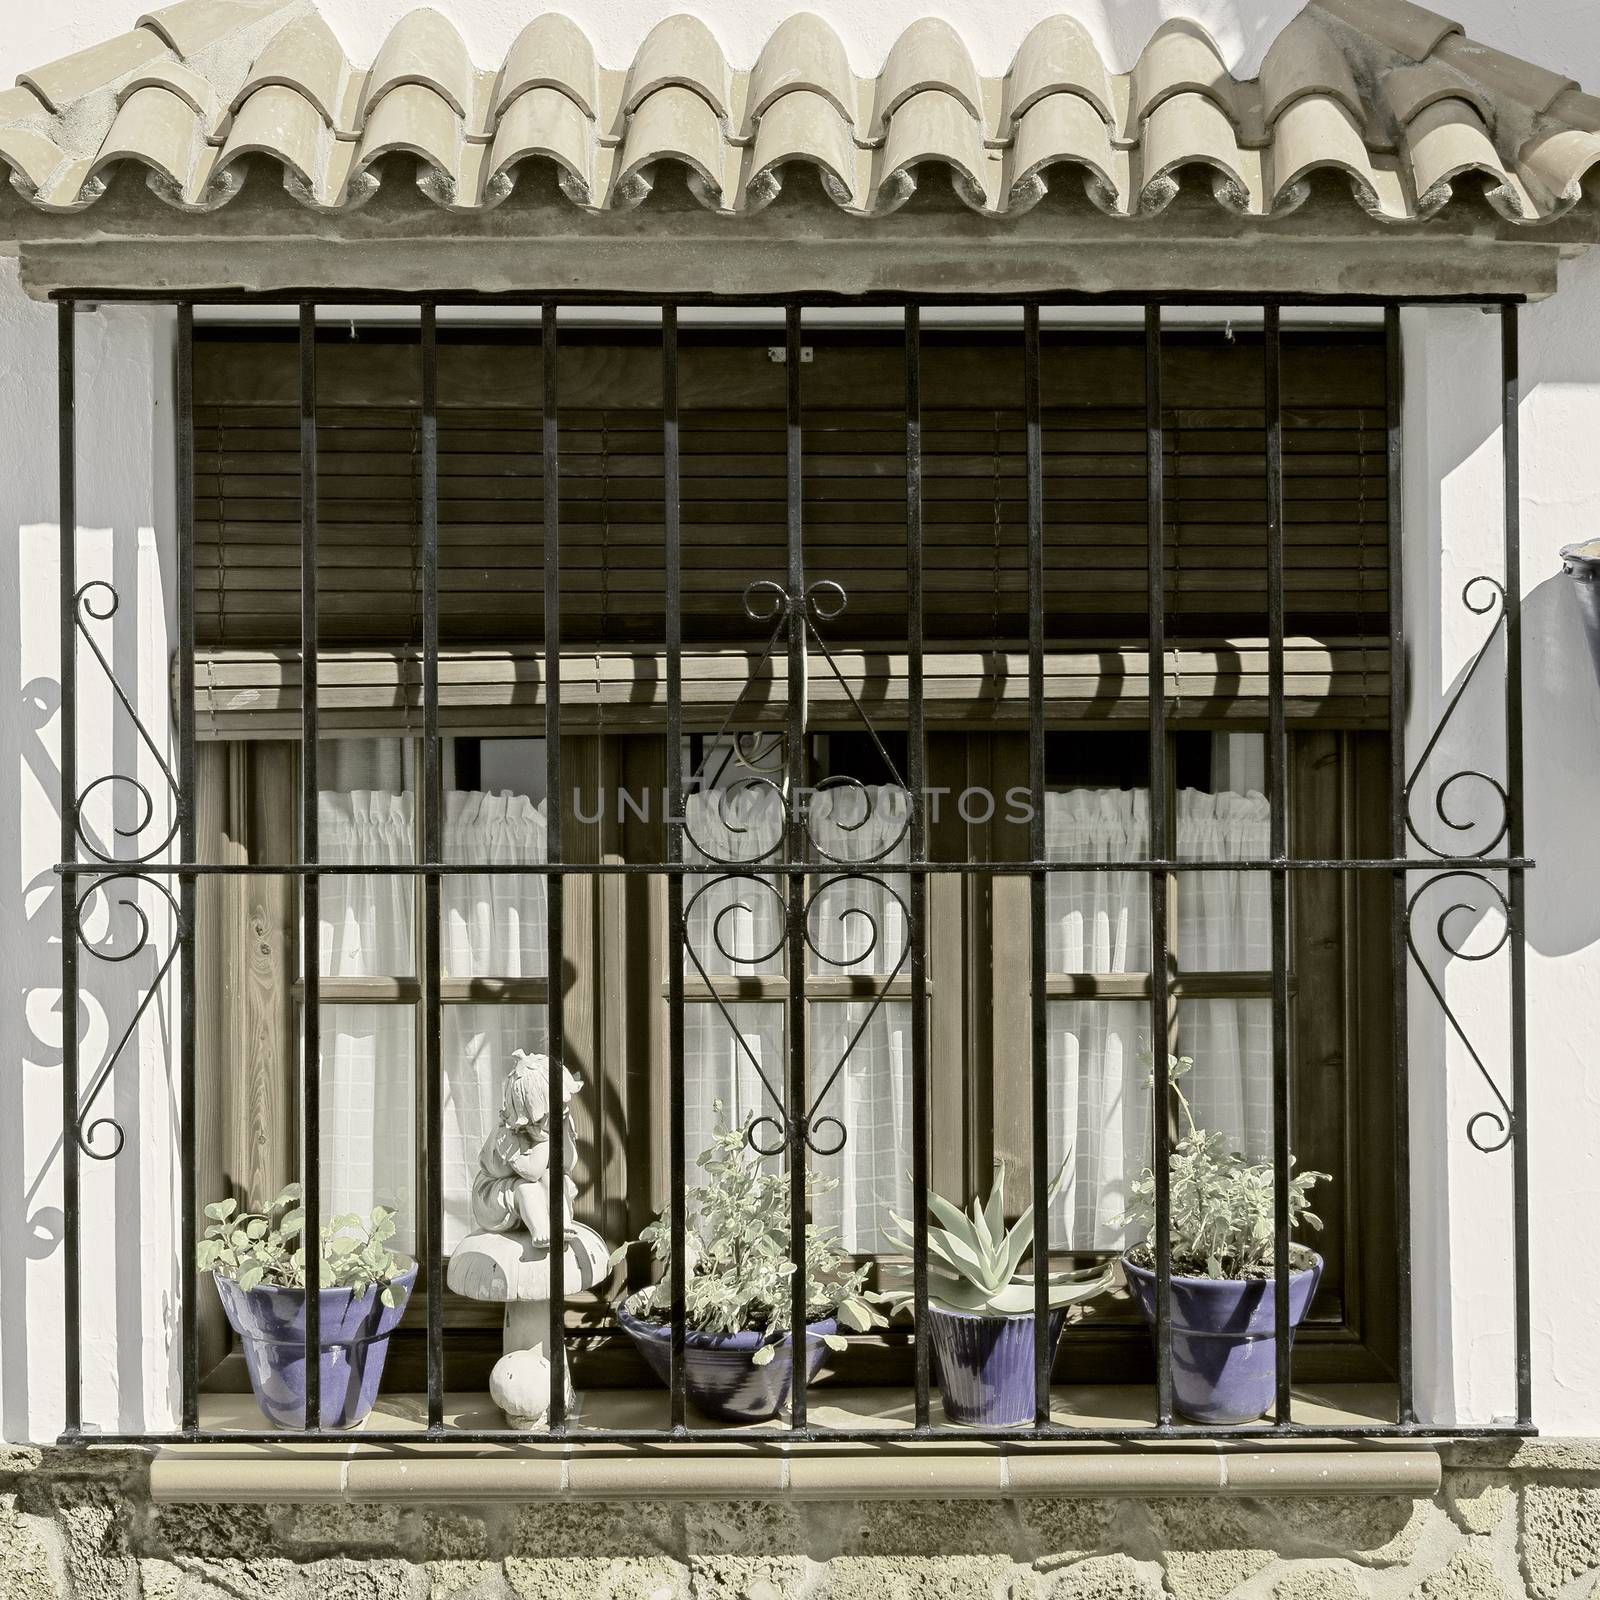 The Renovated Facade of the Old Spain House, Vintage Style Toned Picture